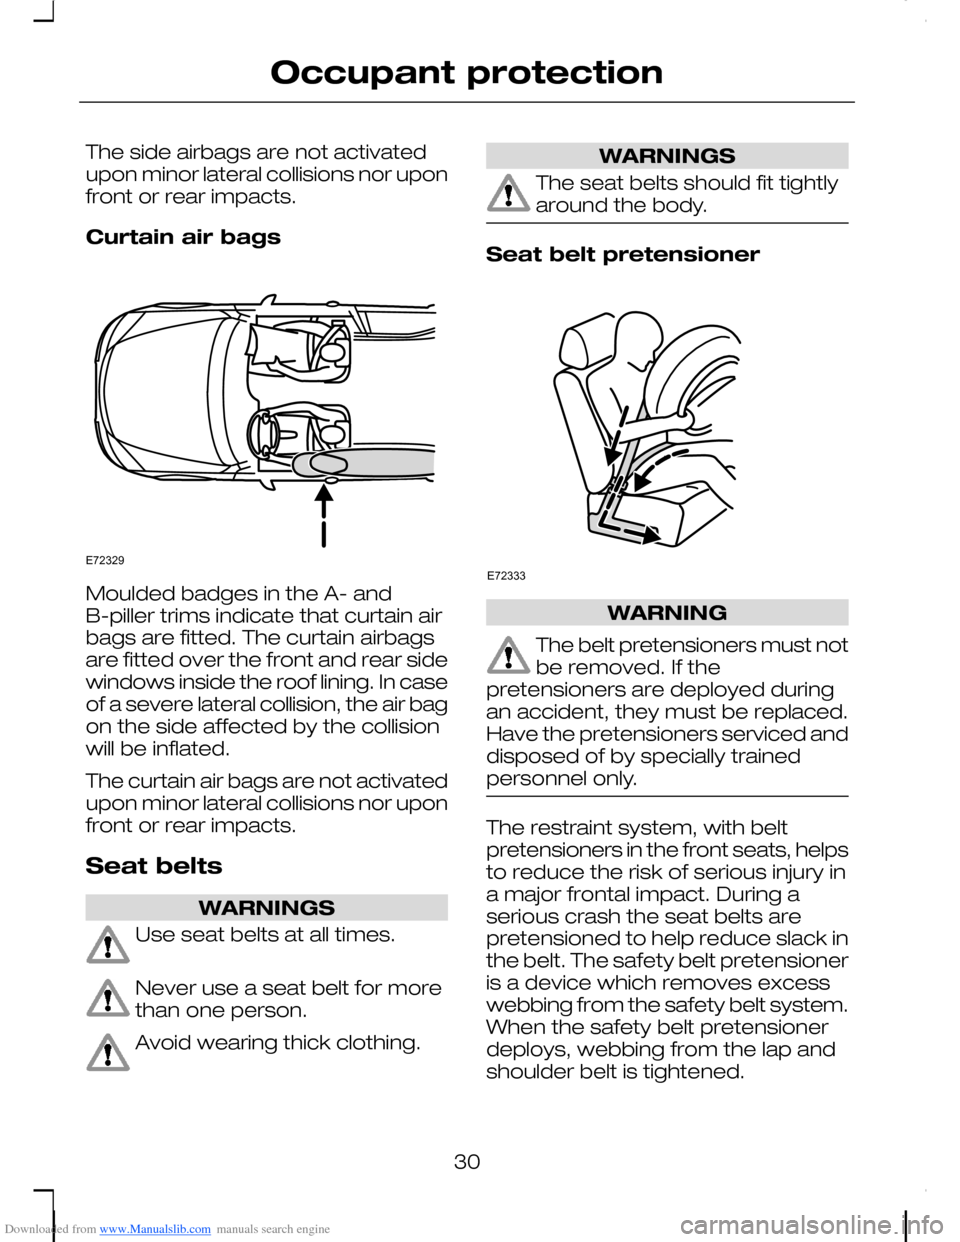 FORD C MAX 2008 1.G User Guide Downloaded from www.Manualslib.com manuals search engine The side airbags are not activatedupon minor lateral collisions nor uponfront or rear impacts.
Curtain air bags
Moulded badges in the A- andB-p